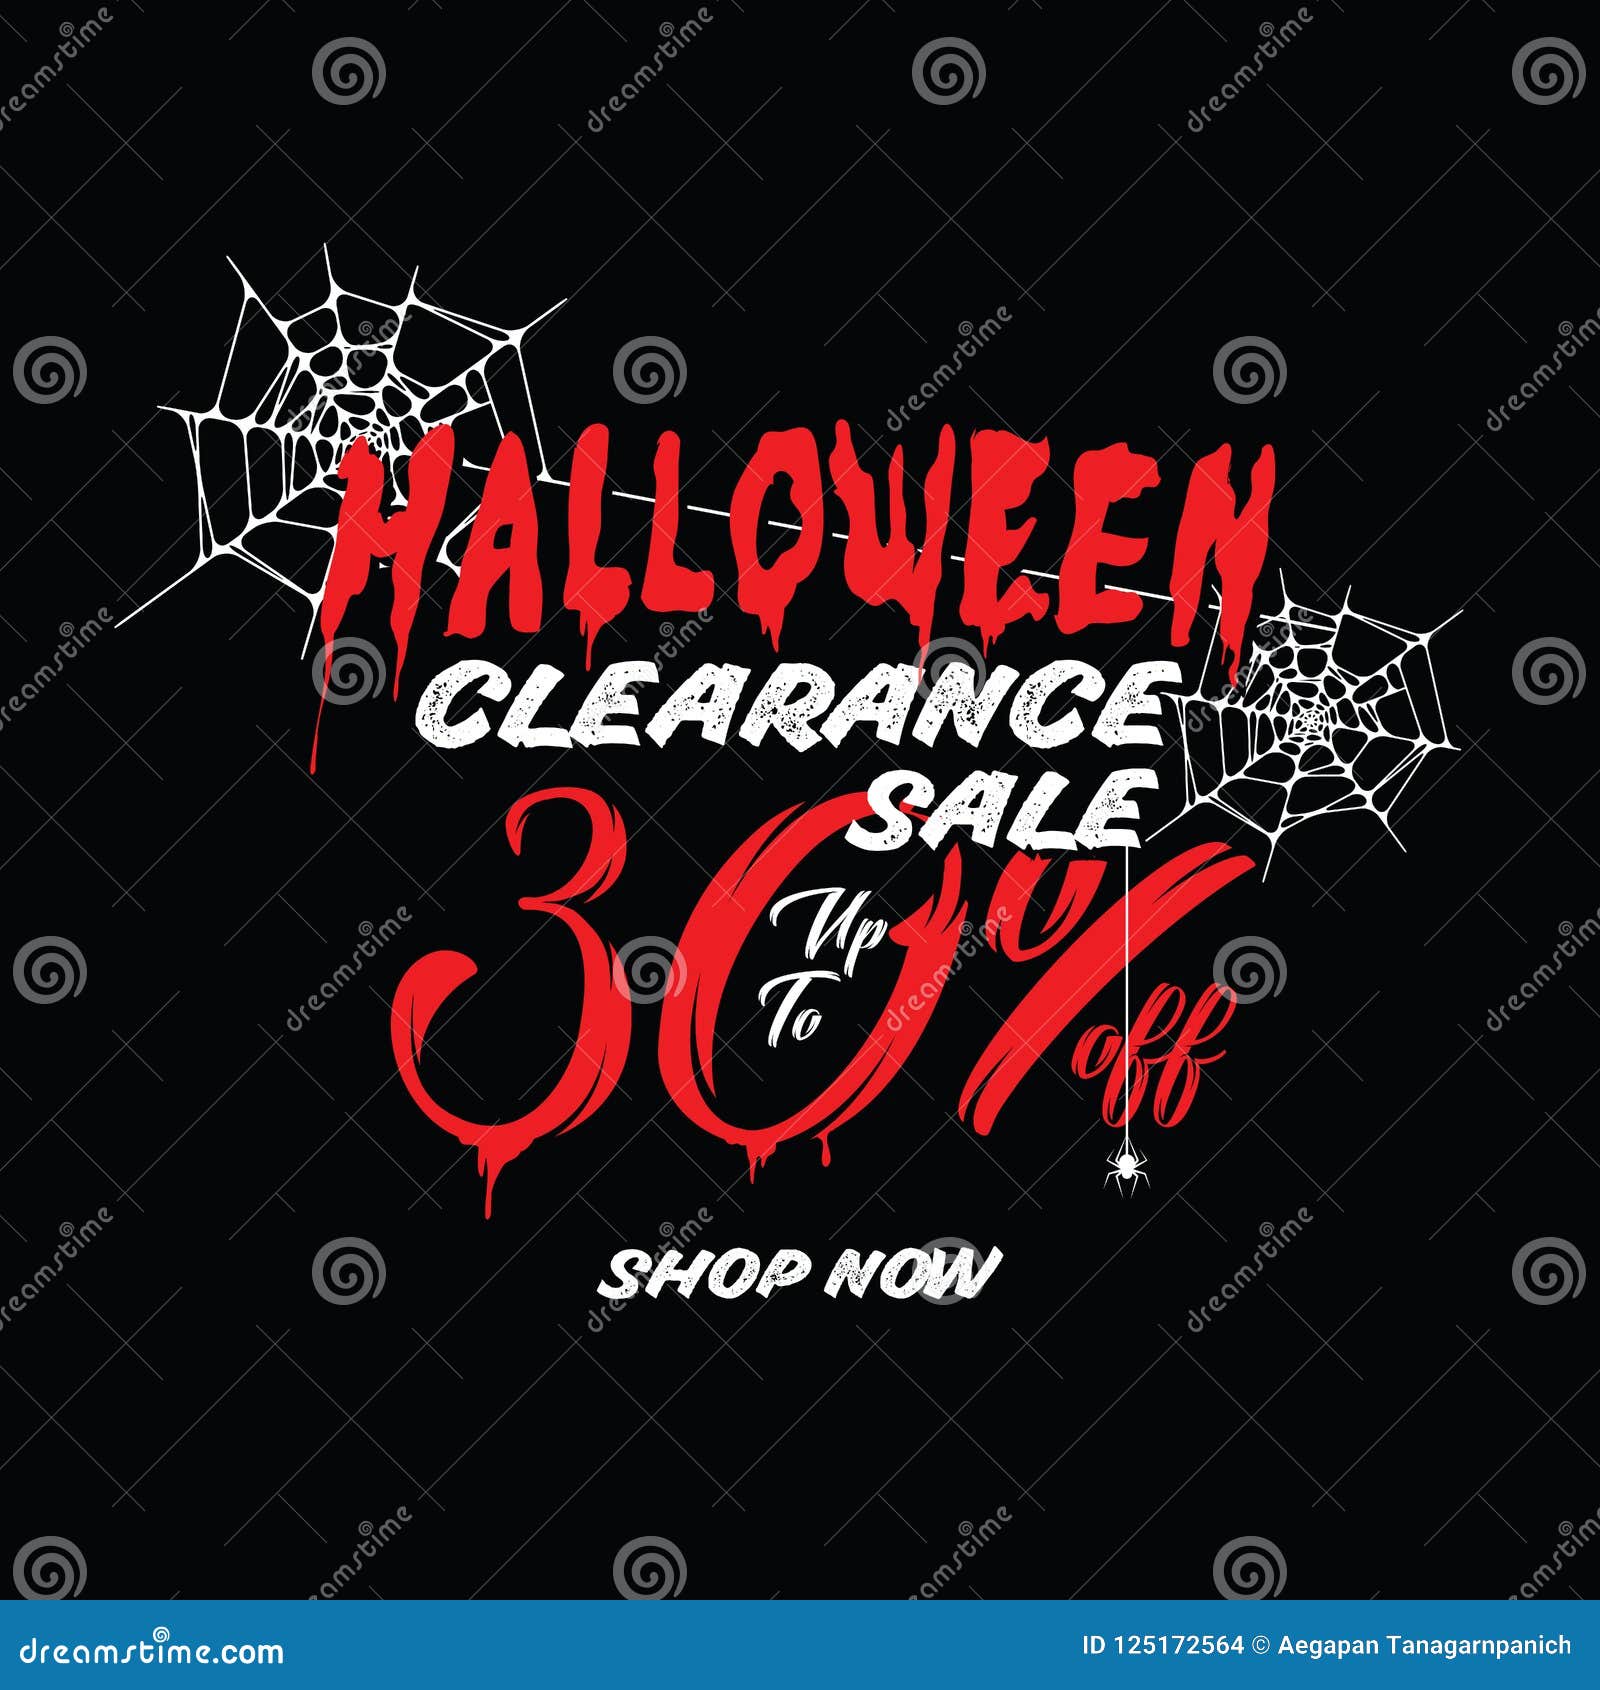 Halloween Clearance Sale Vol.1 30 Percent Heading Design For Ban Stock